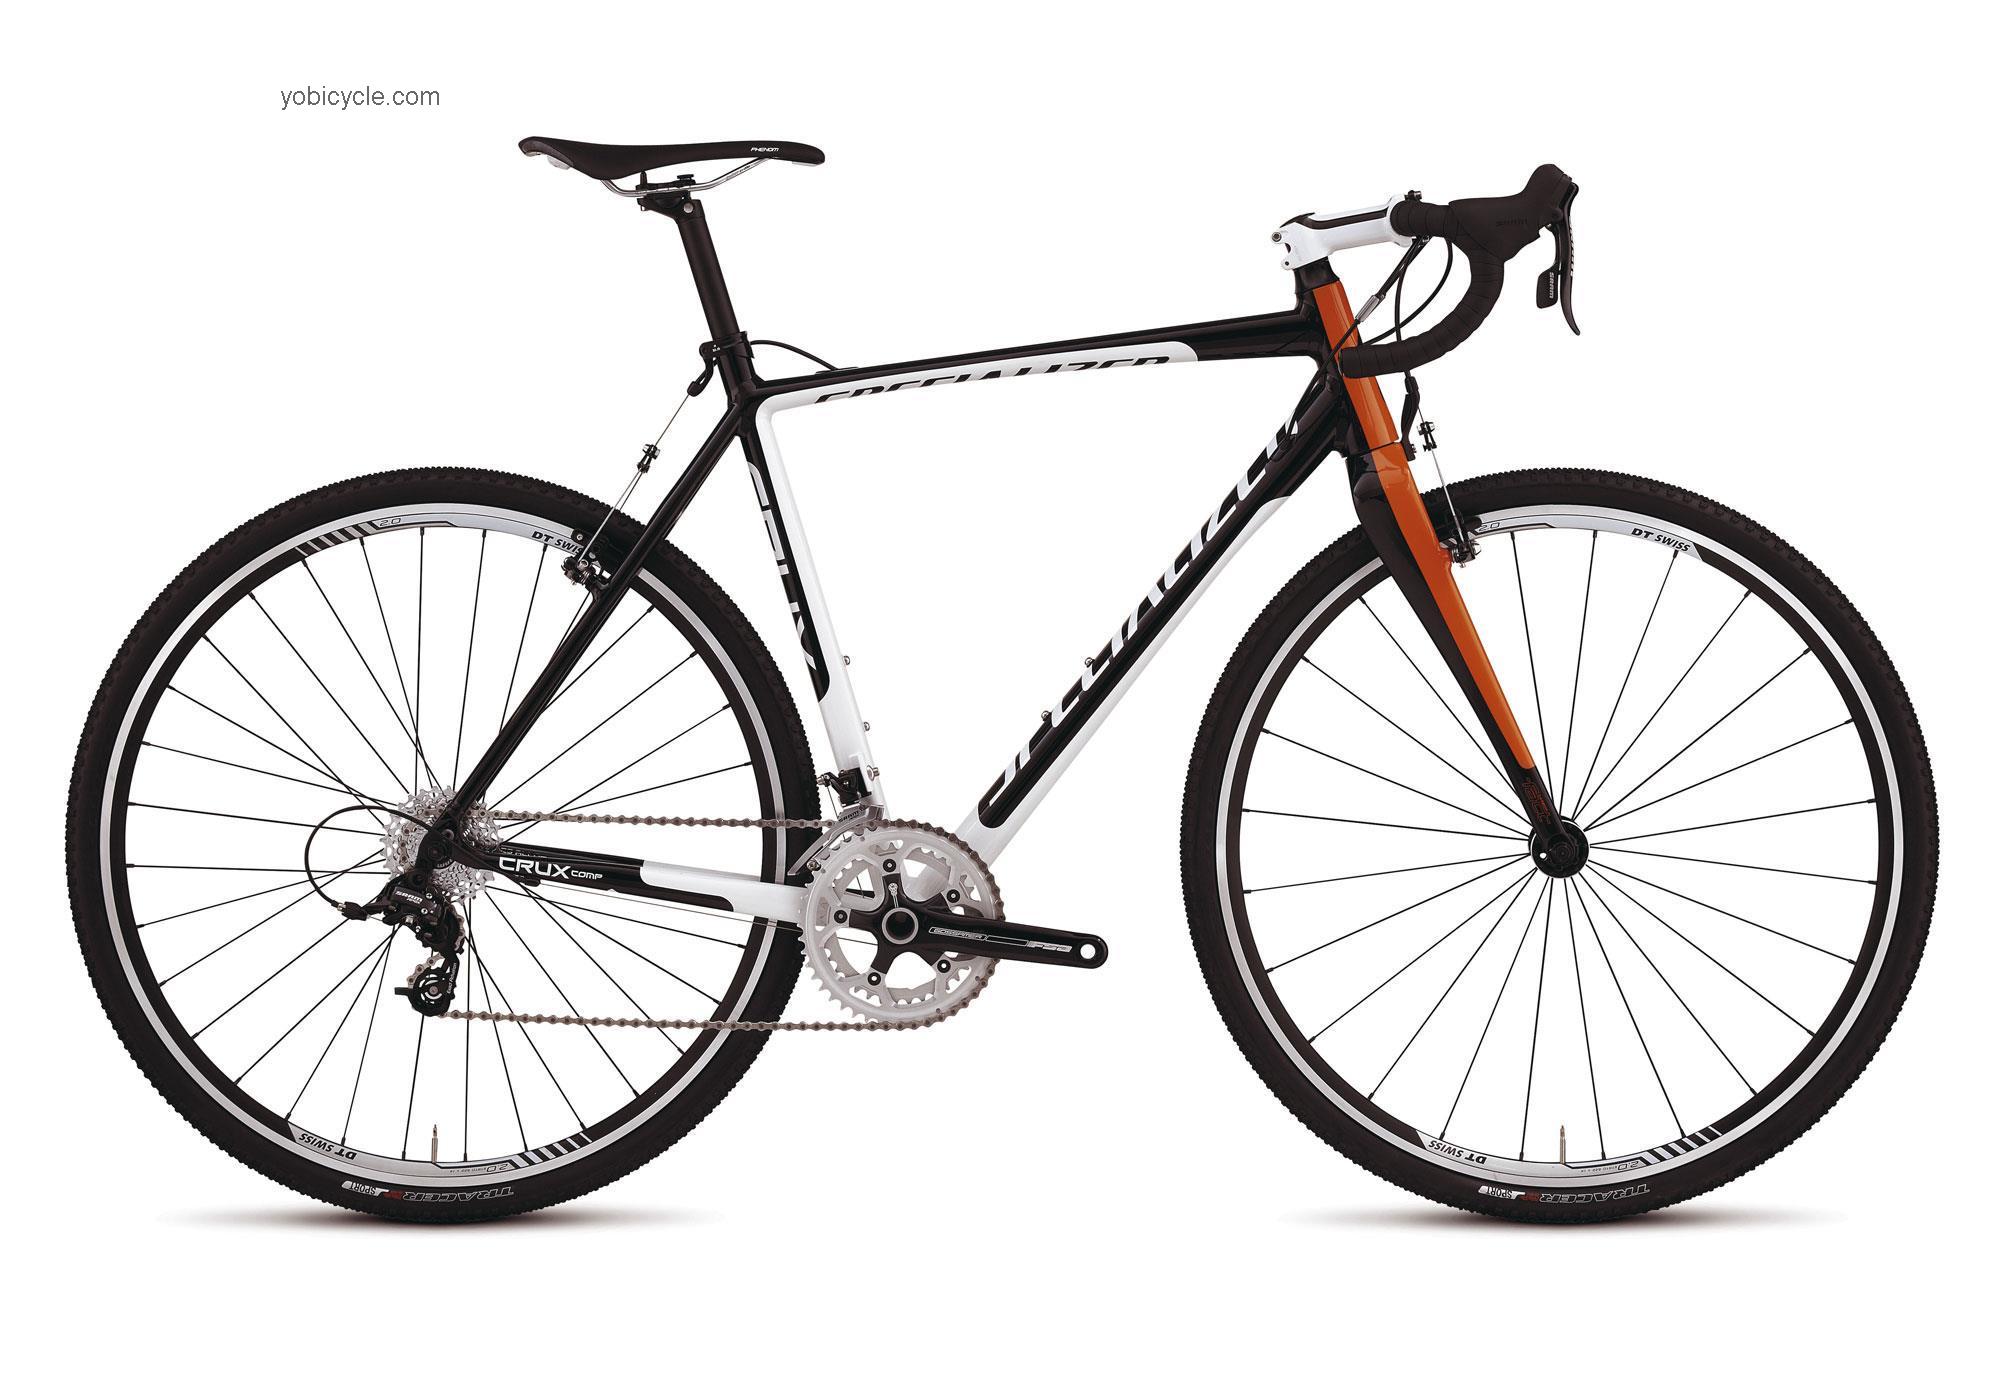 Specialized Crux Comp competitors and comparison tool online specs and performance